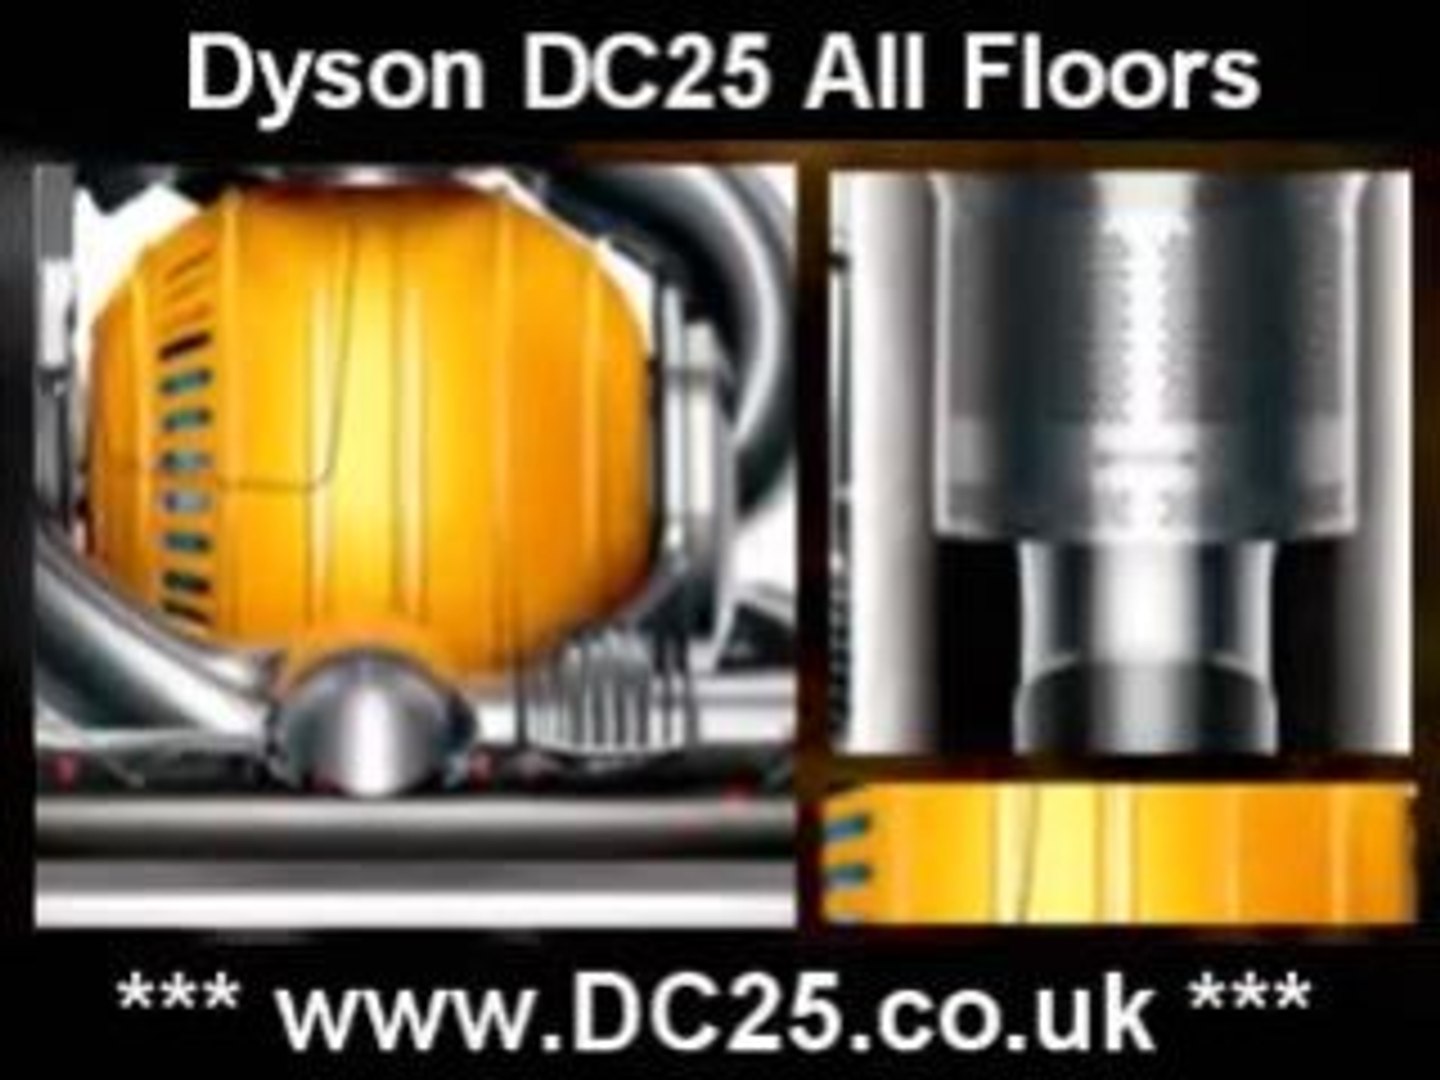 Dyson Dc25 All Floors Vacuum Cleaner Video Dailymotion